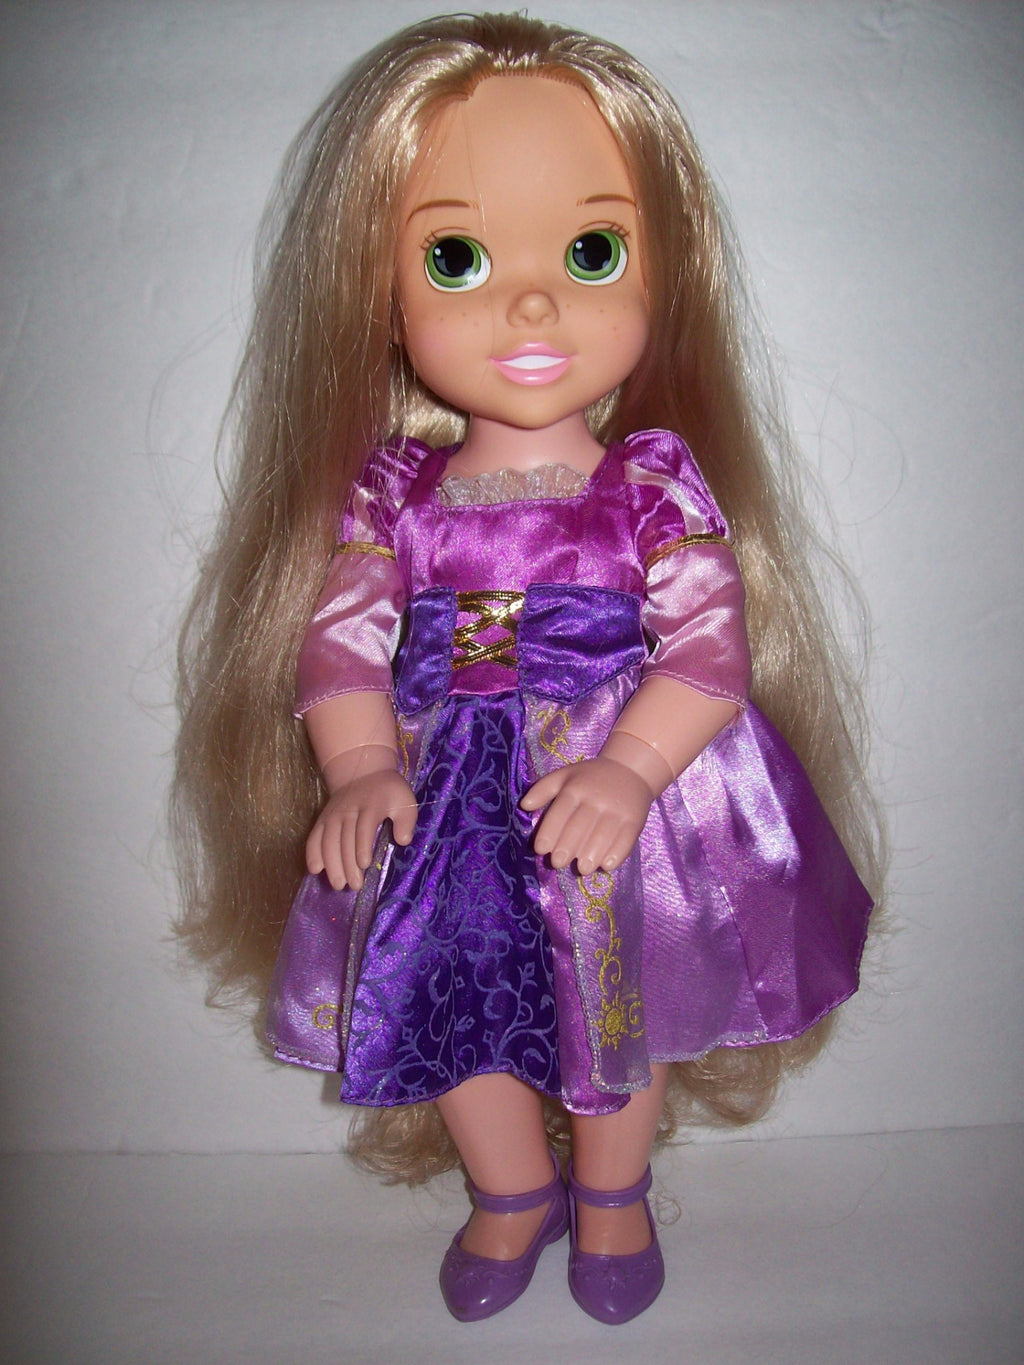 diana and new rapunzel doll